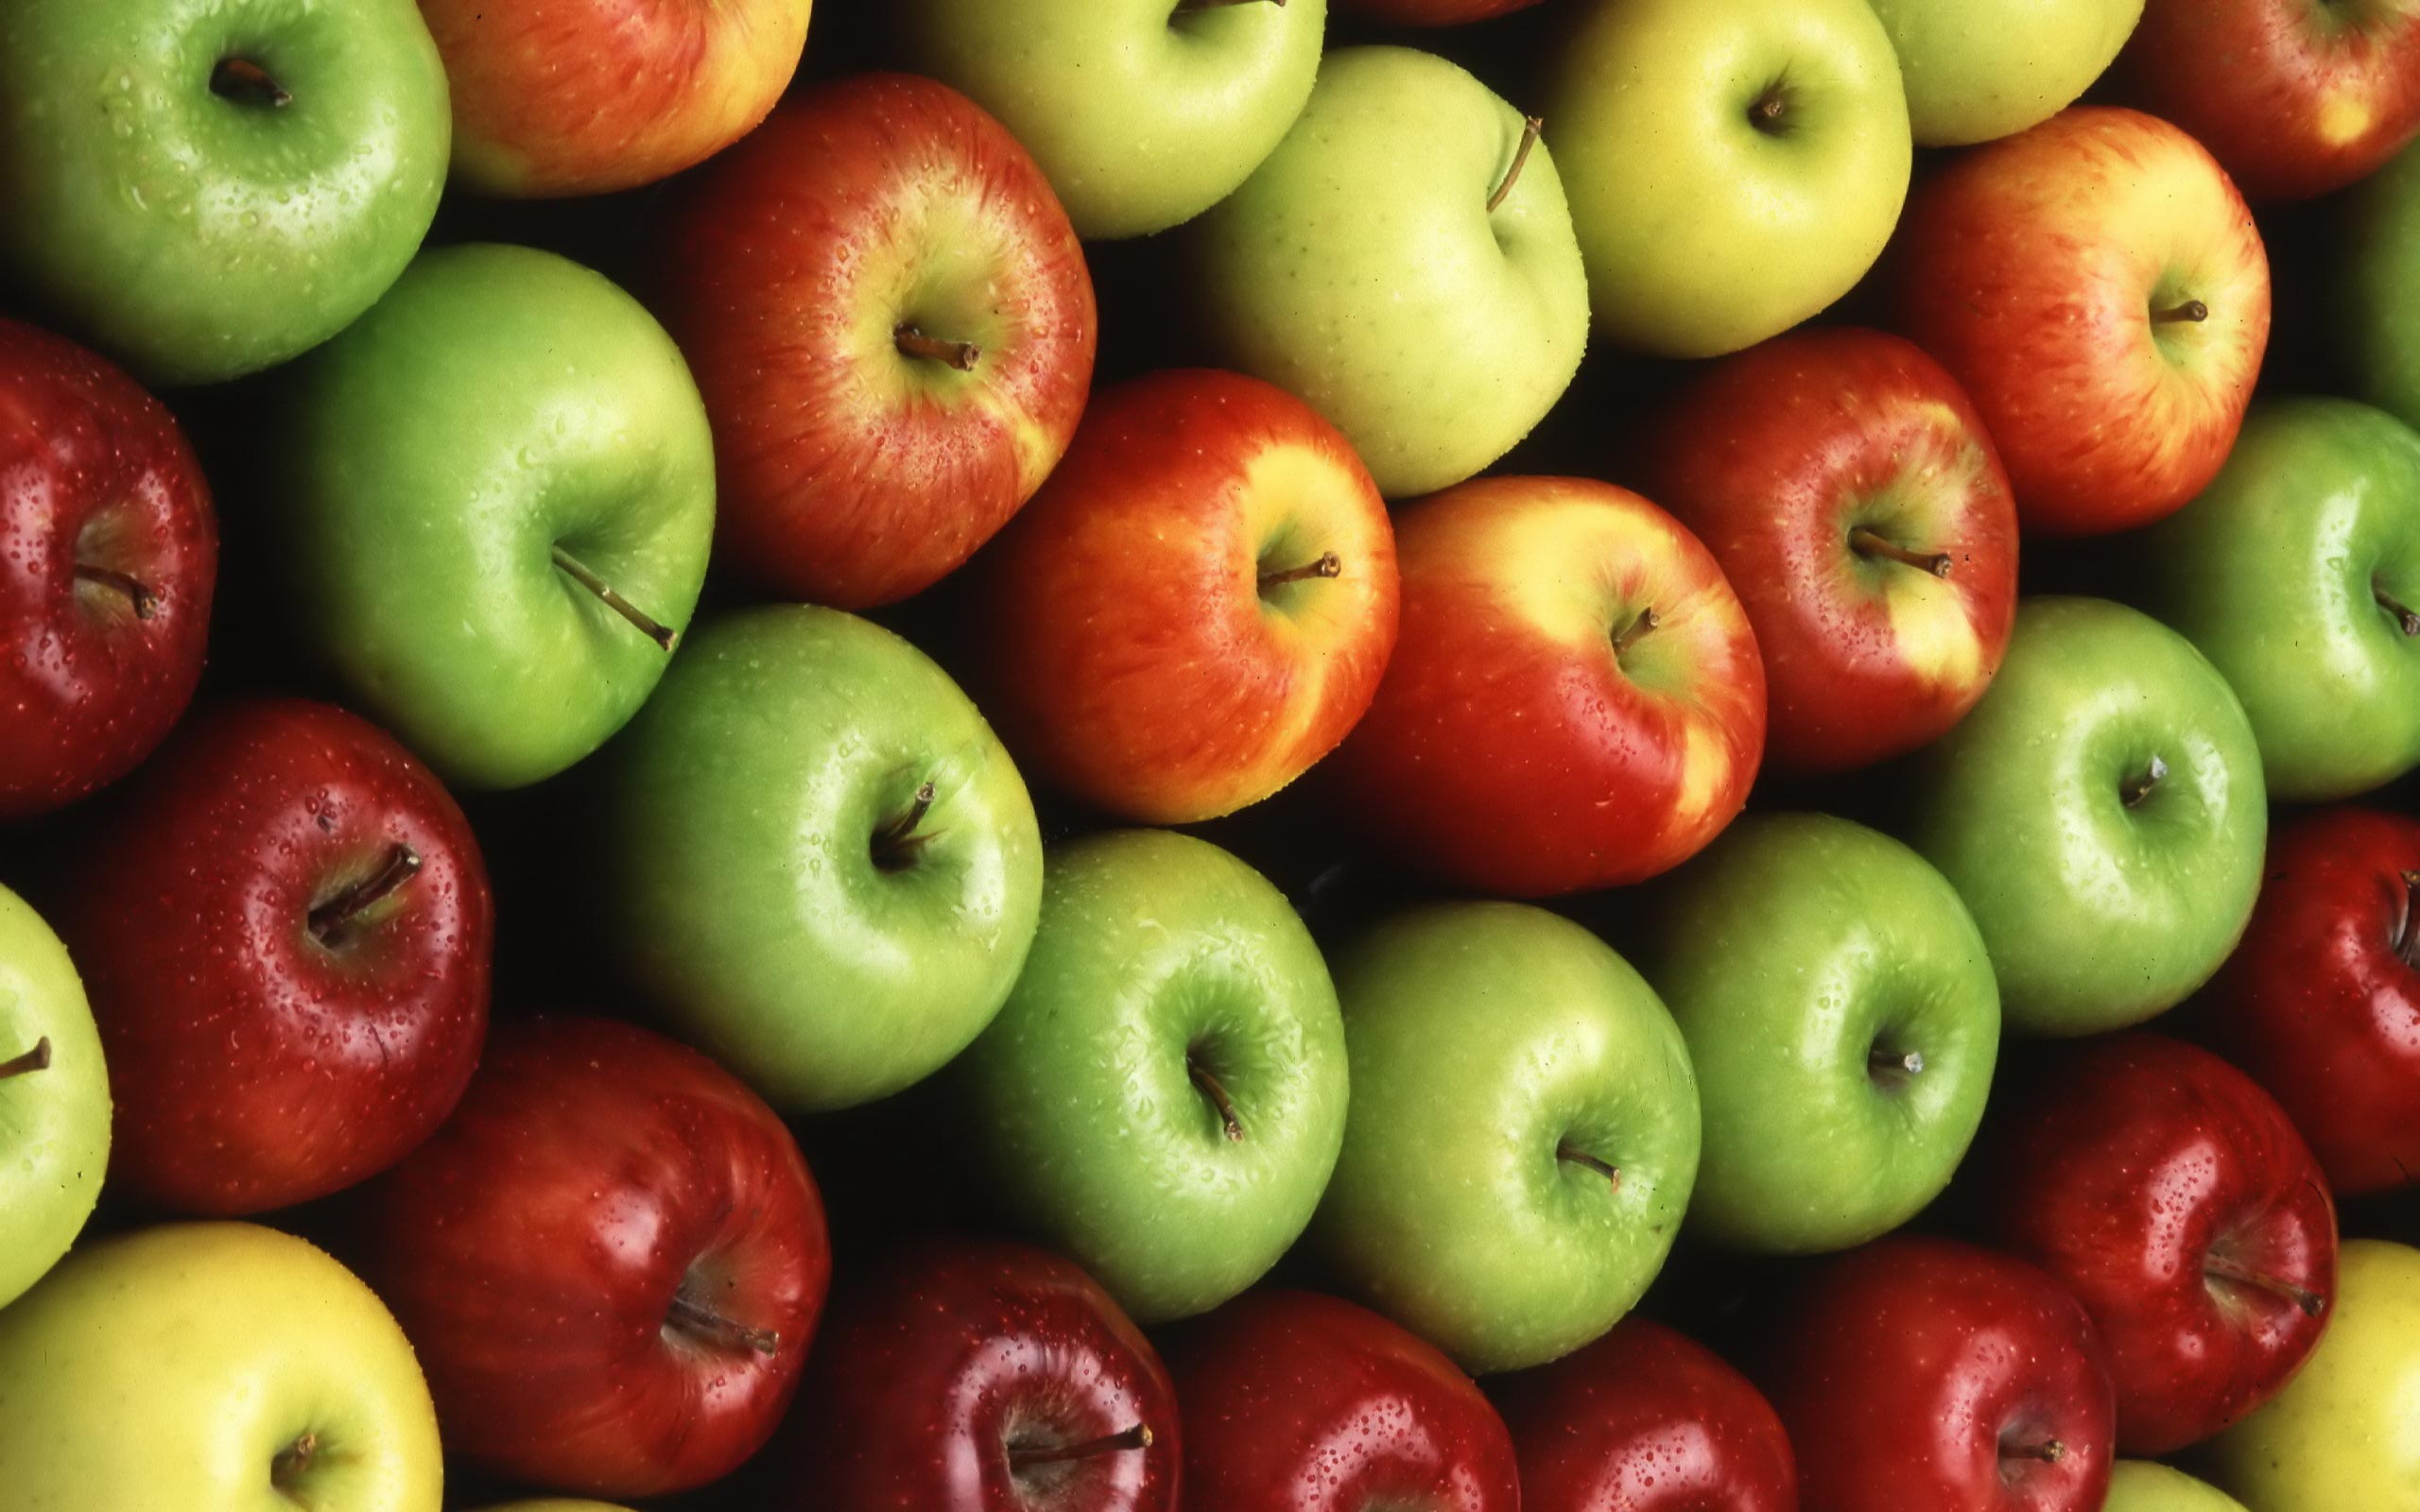 glamorous-assorted-apples-pictures-hd-wallpaper-hd-pictures.jpg